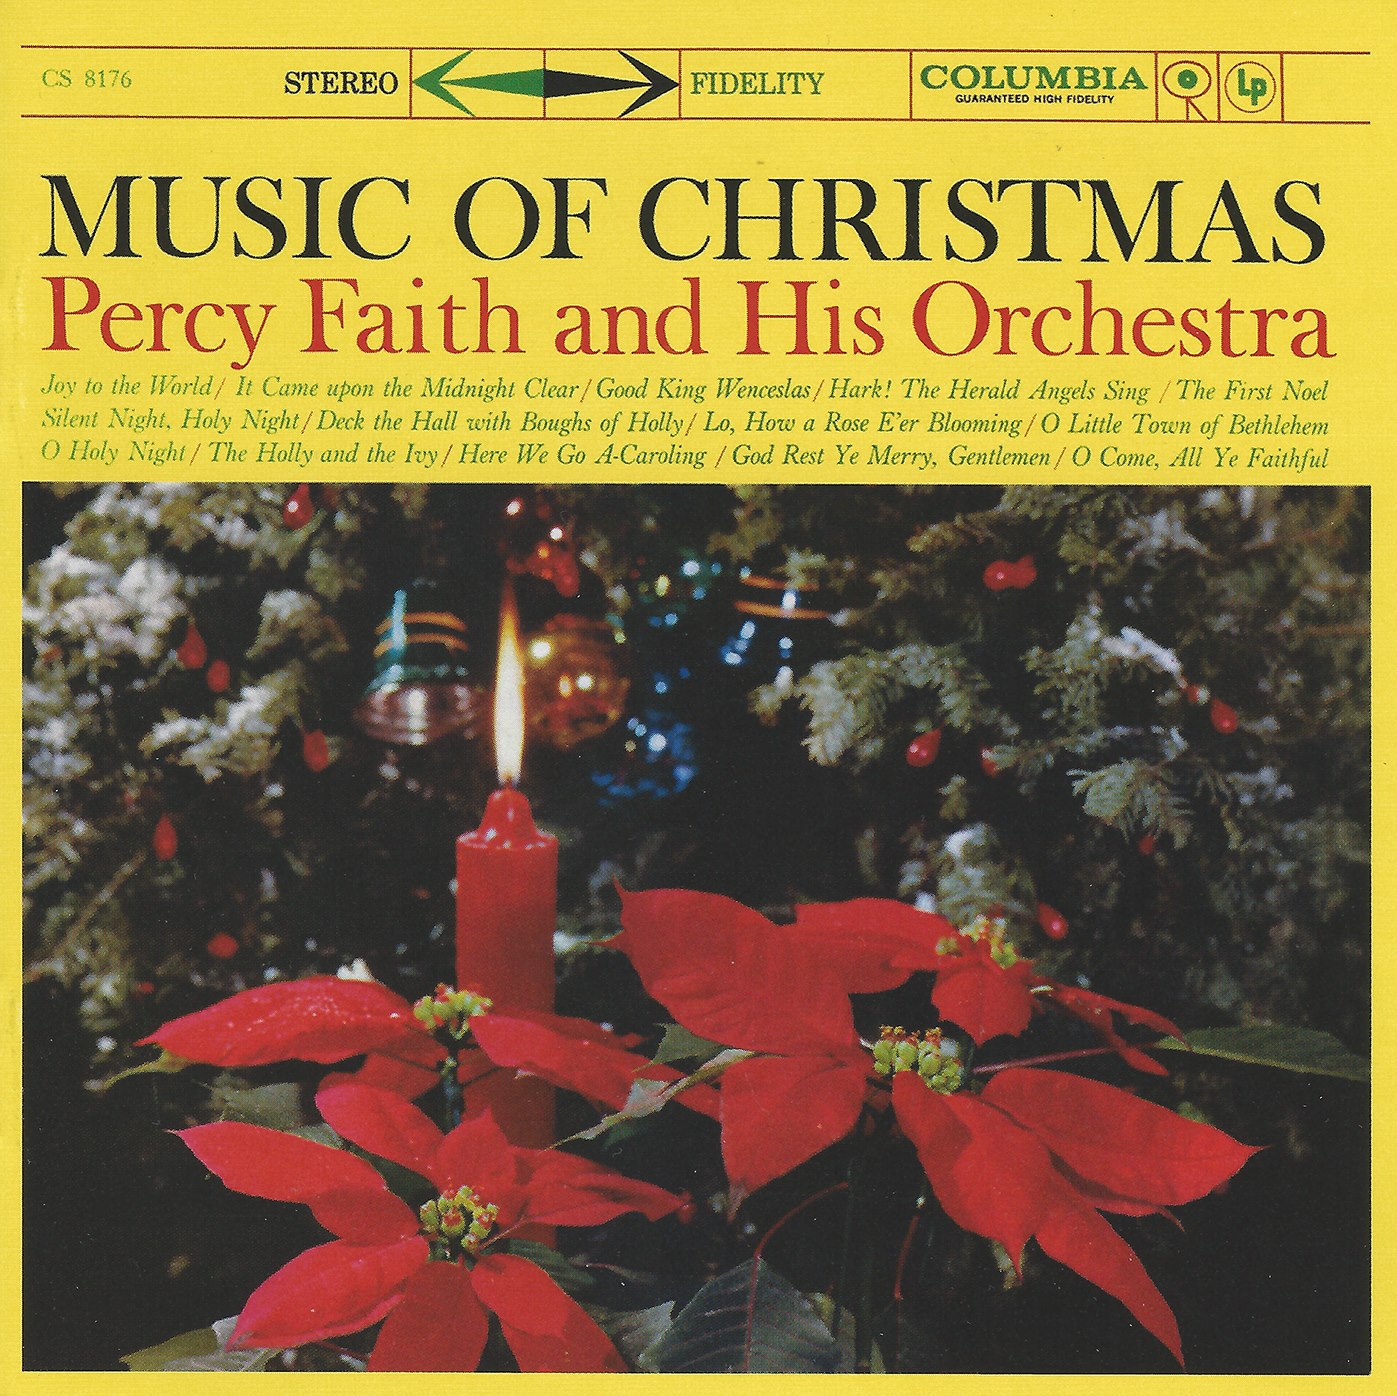 Percy Faith - Music of Christmas (remastered)